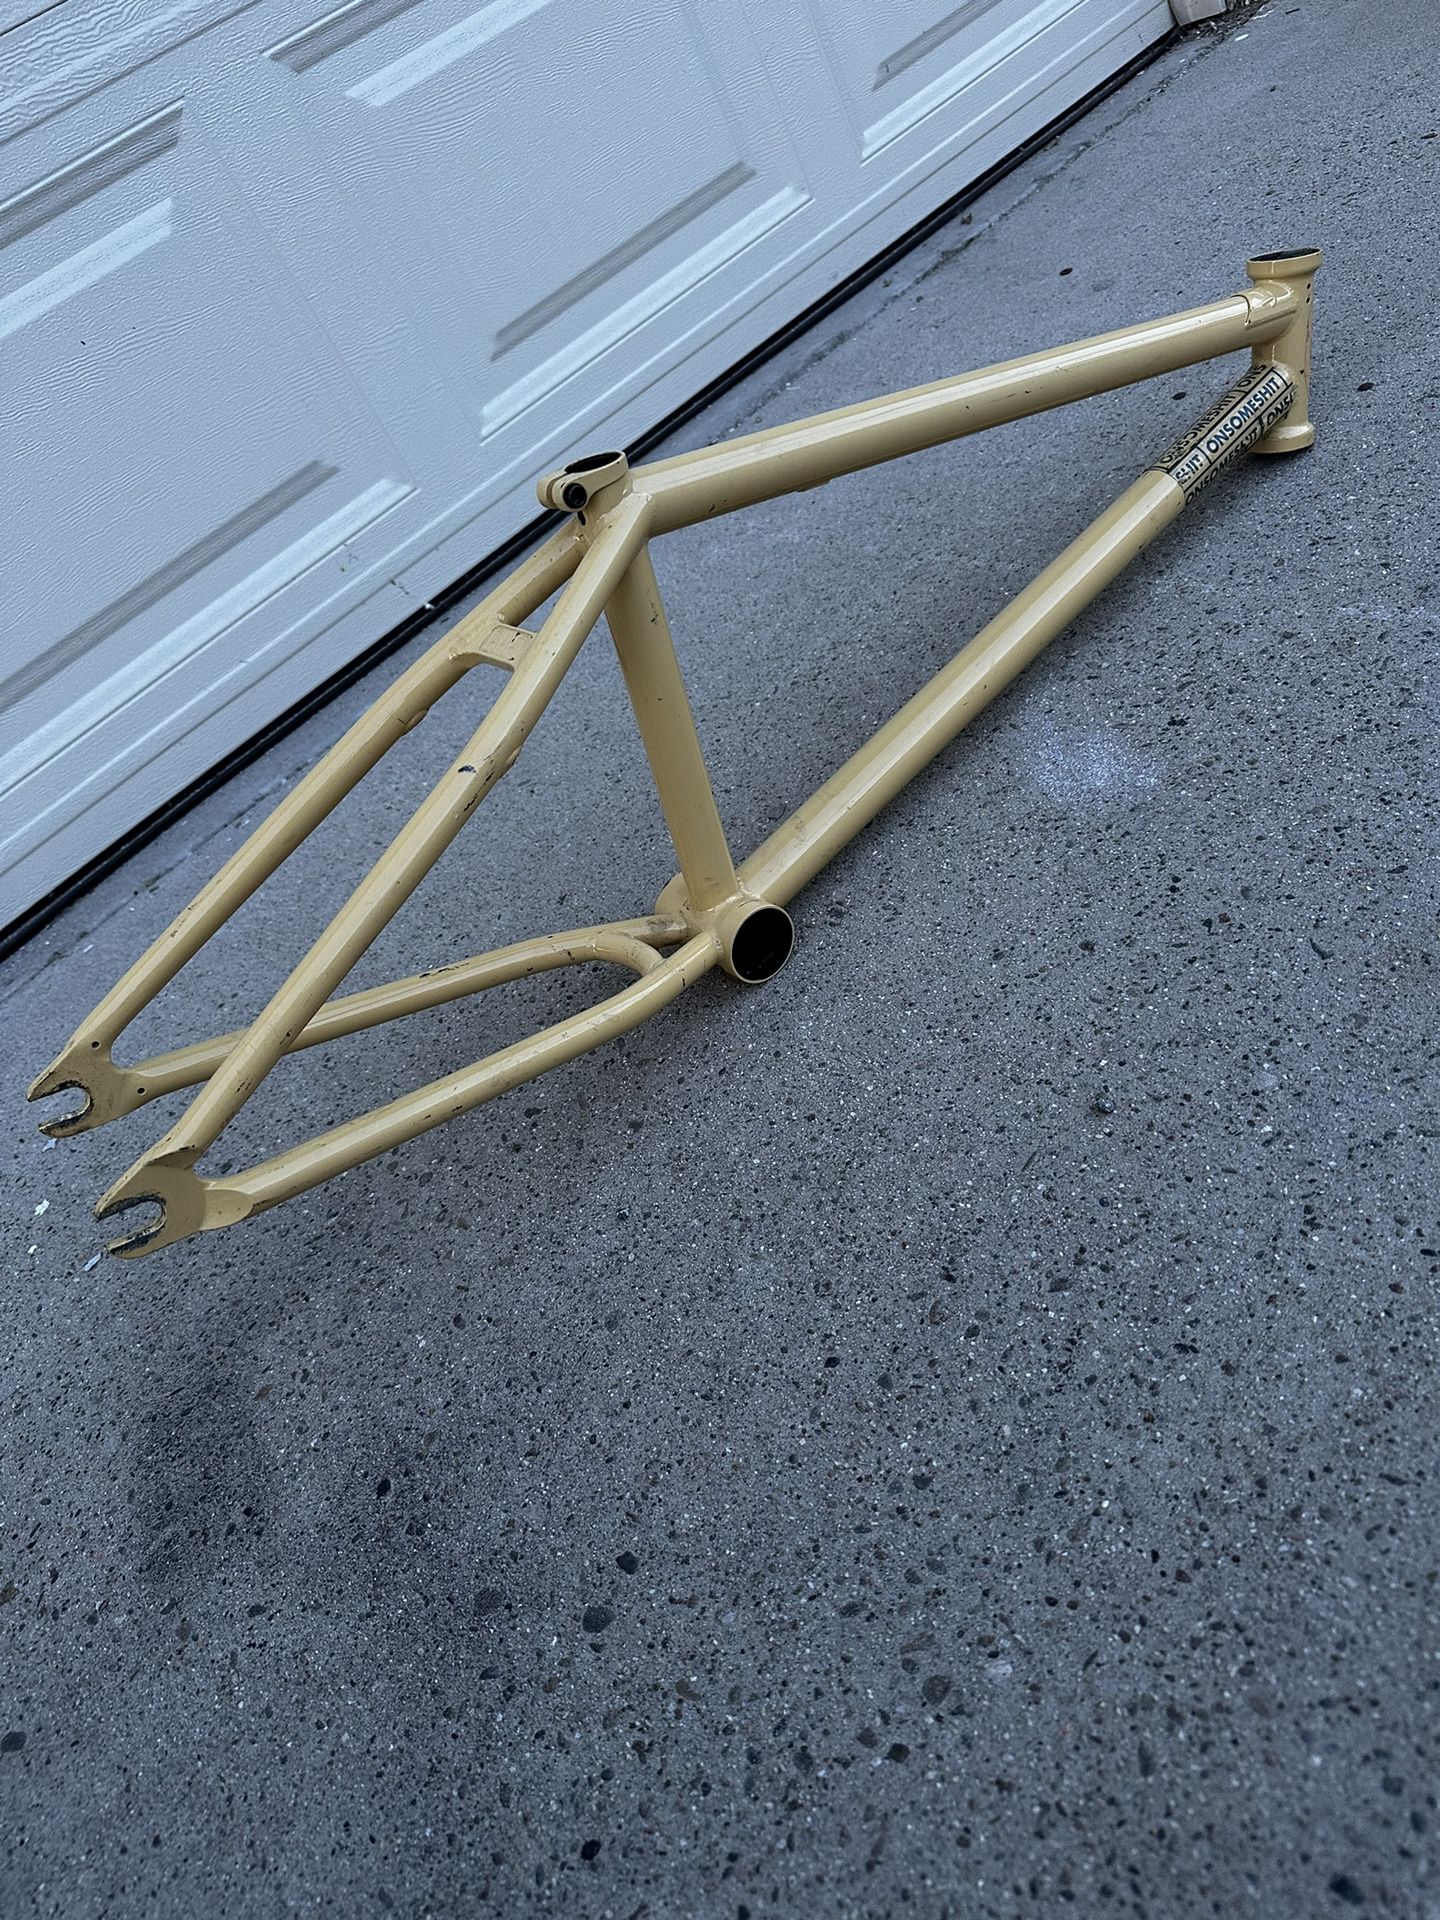 Bmx Bike Parts And Roof Rack ..